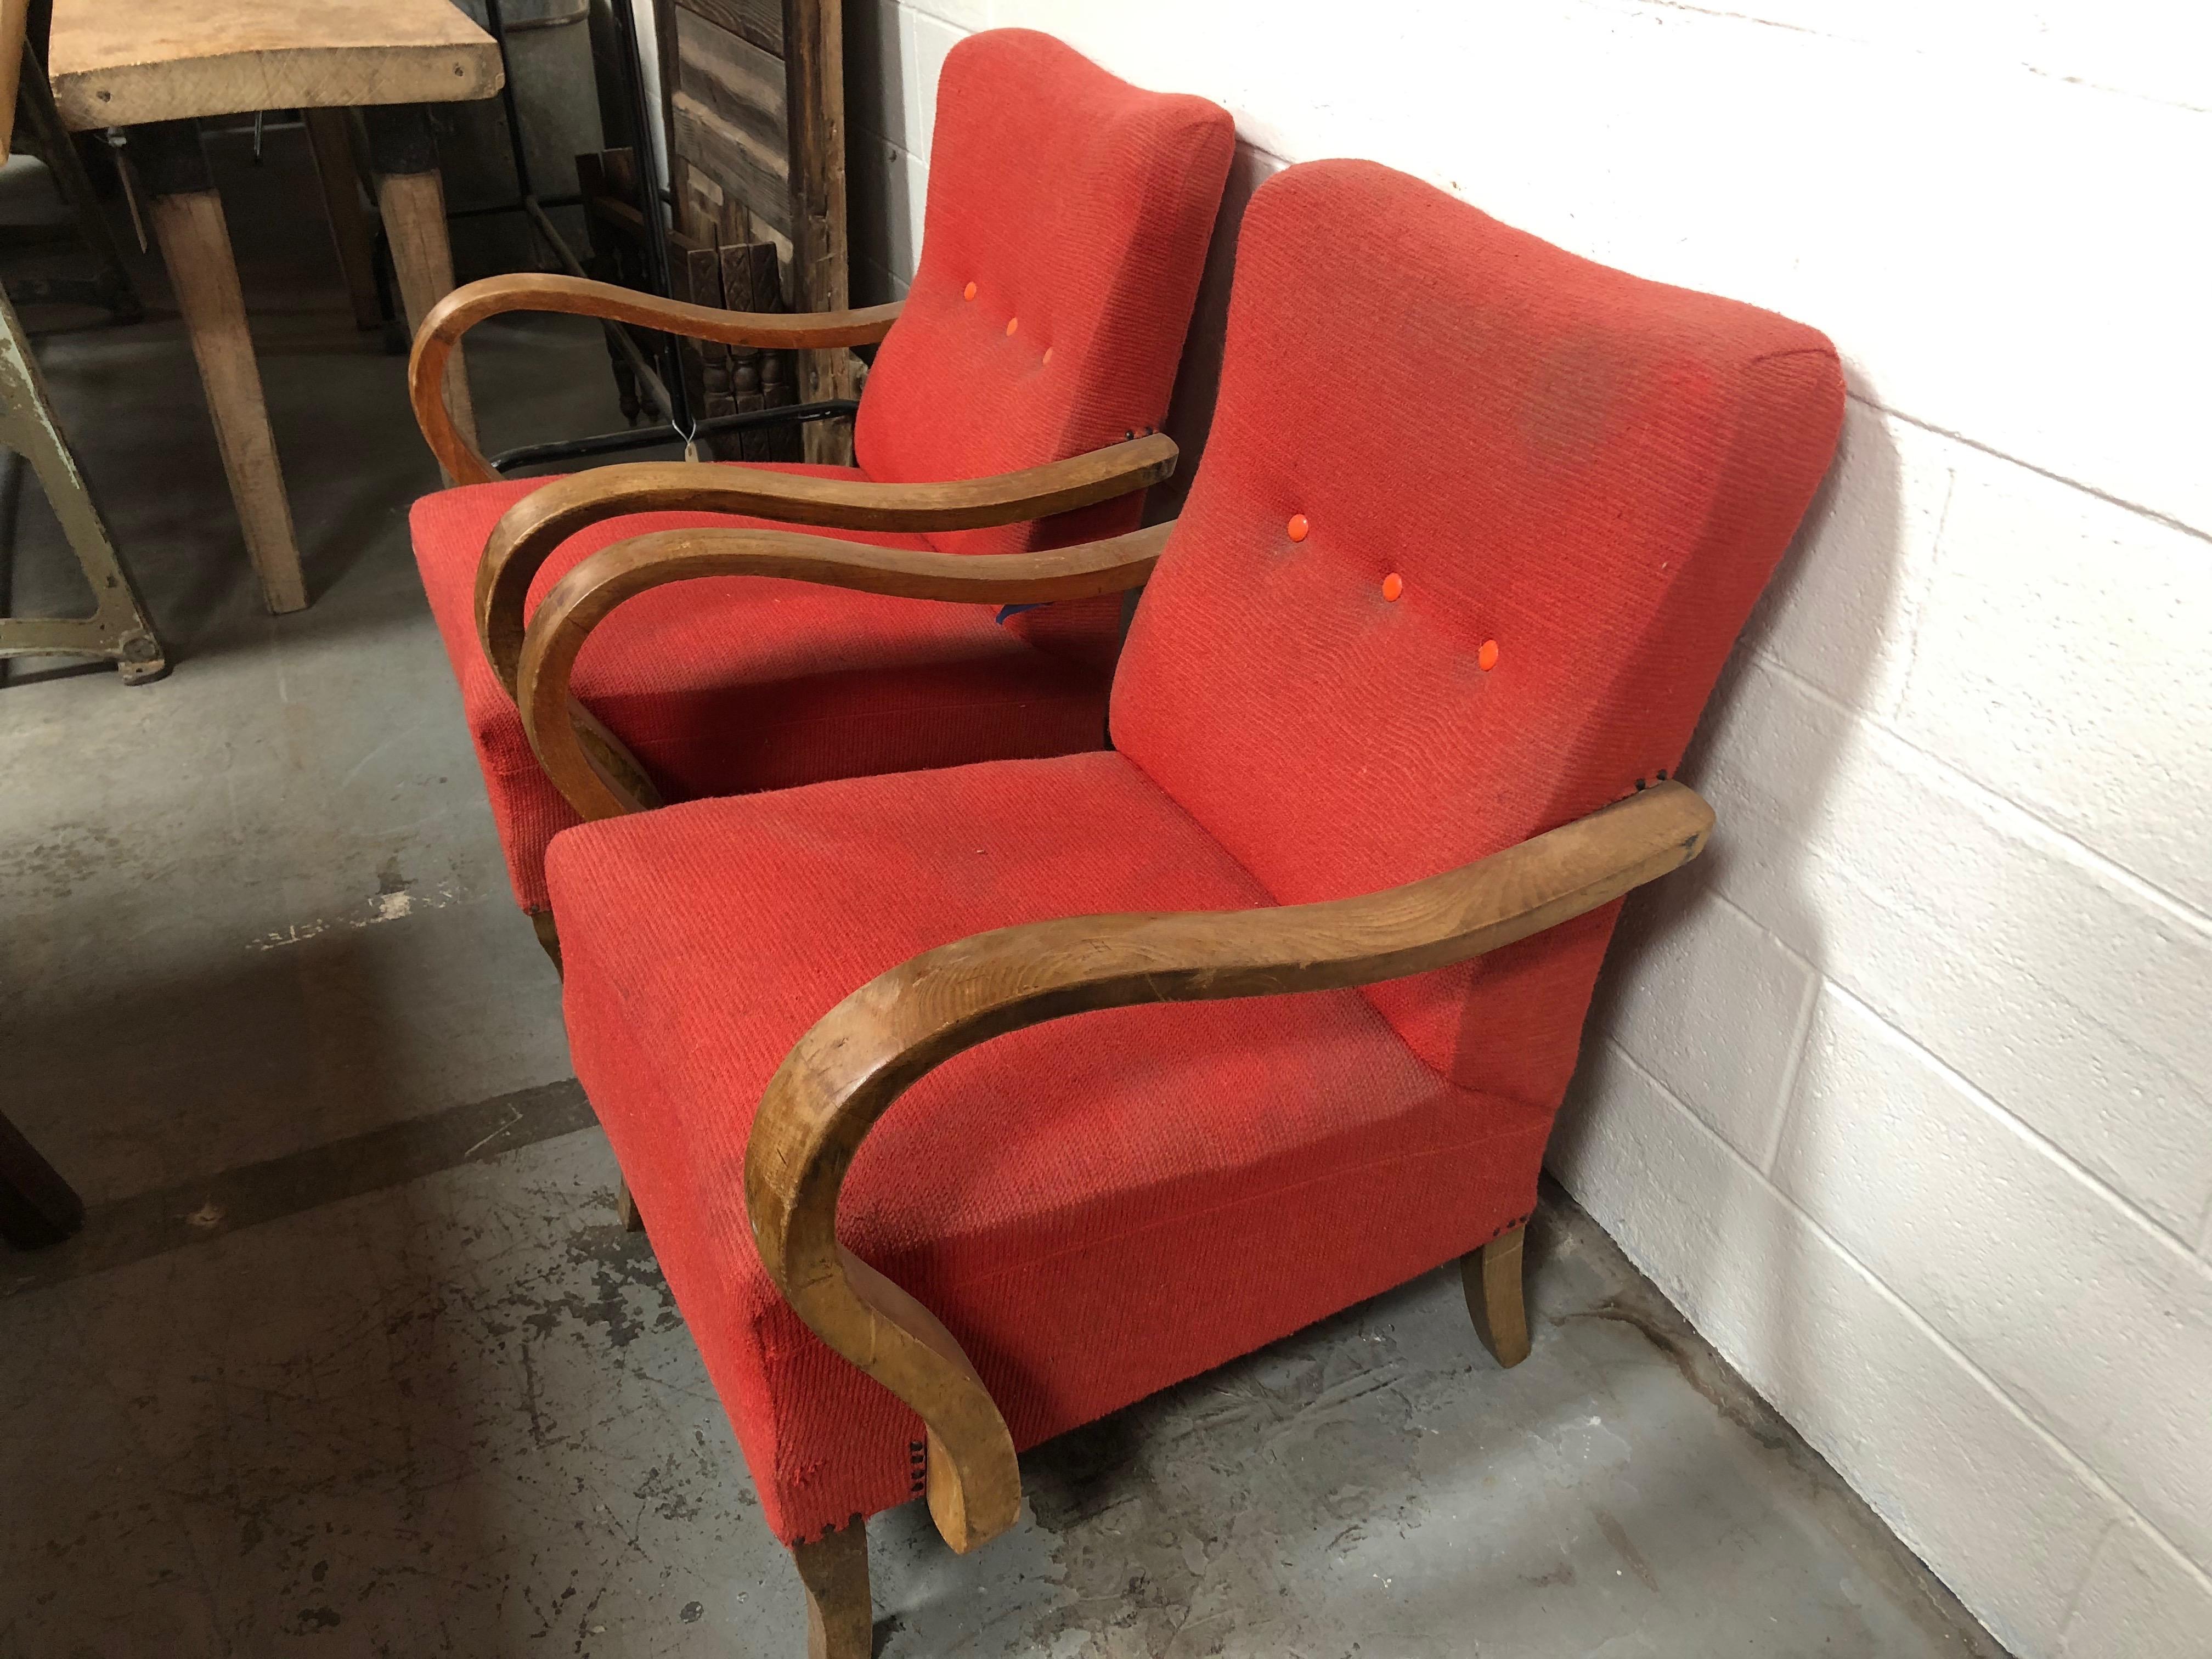 This set of red deco chairs are from France and feature stylish curved wooden arm rests and wooden legs.